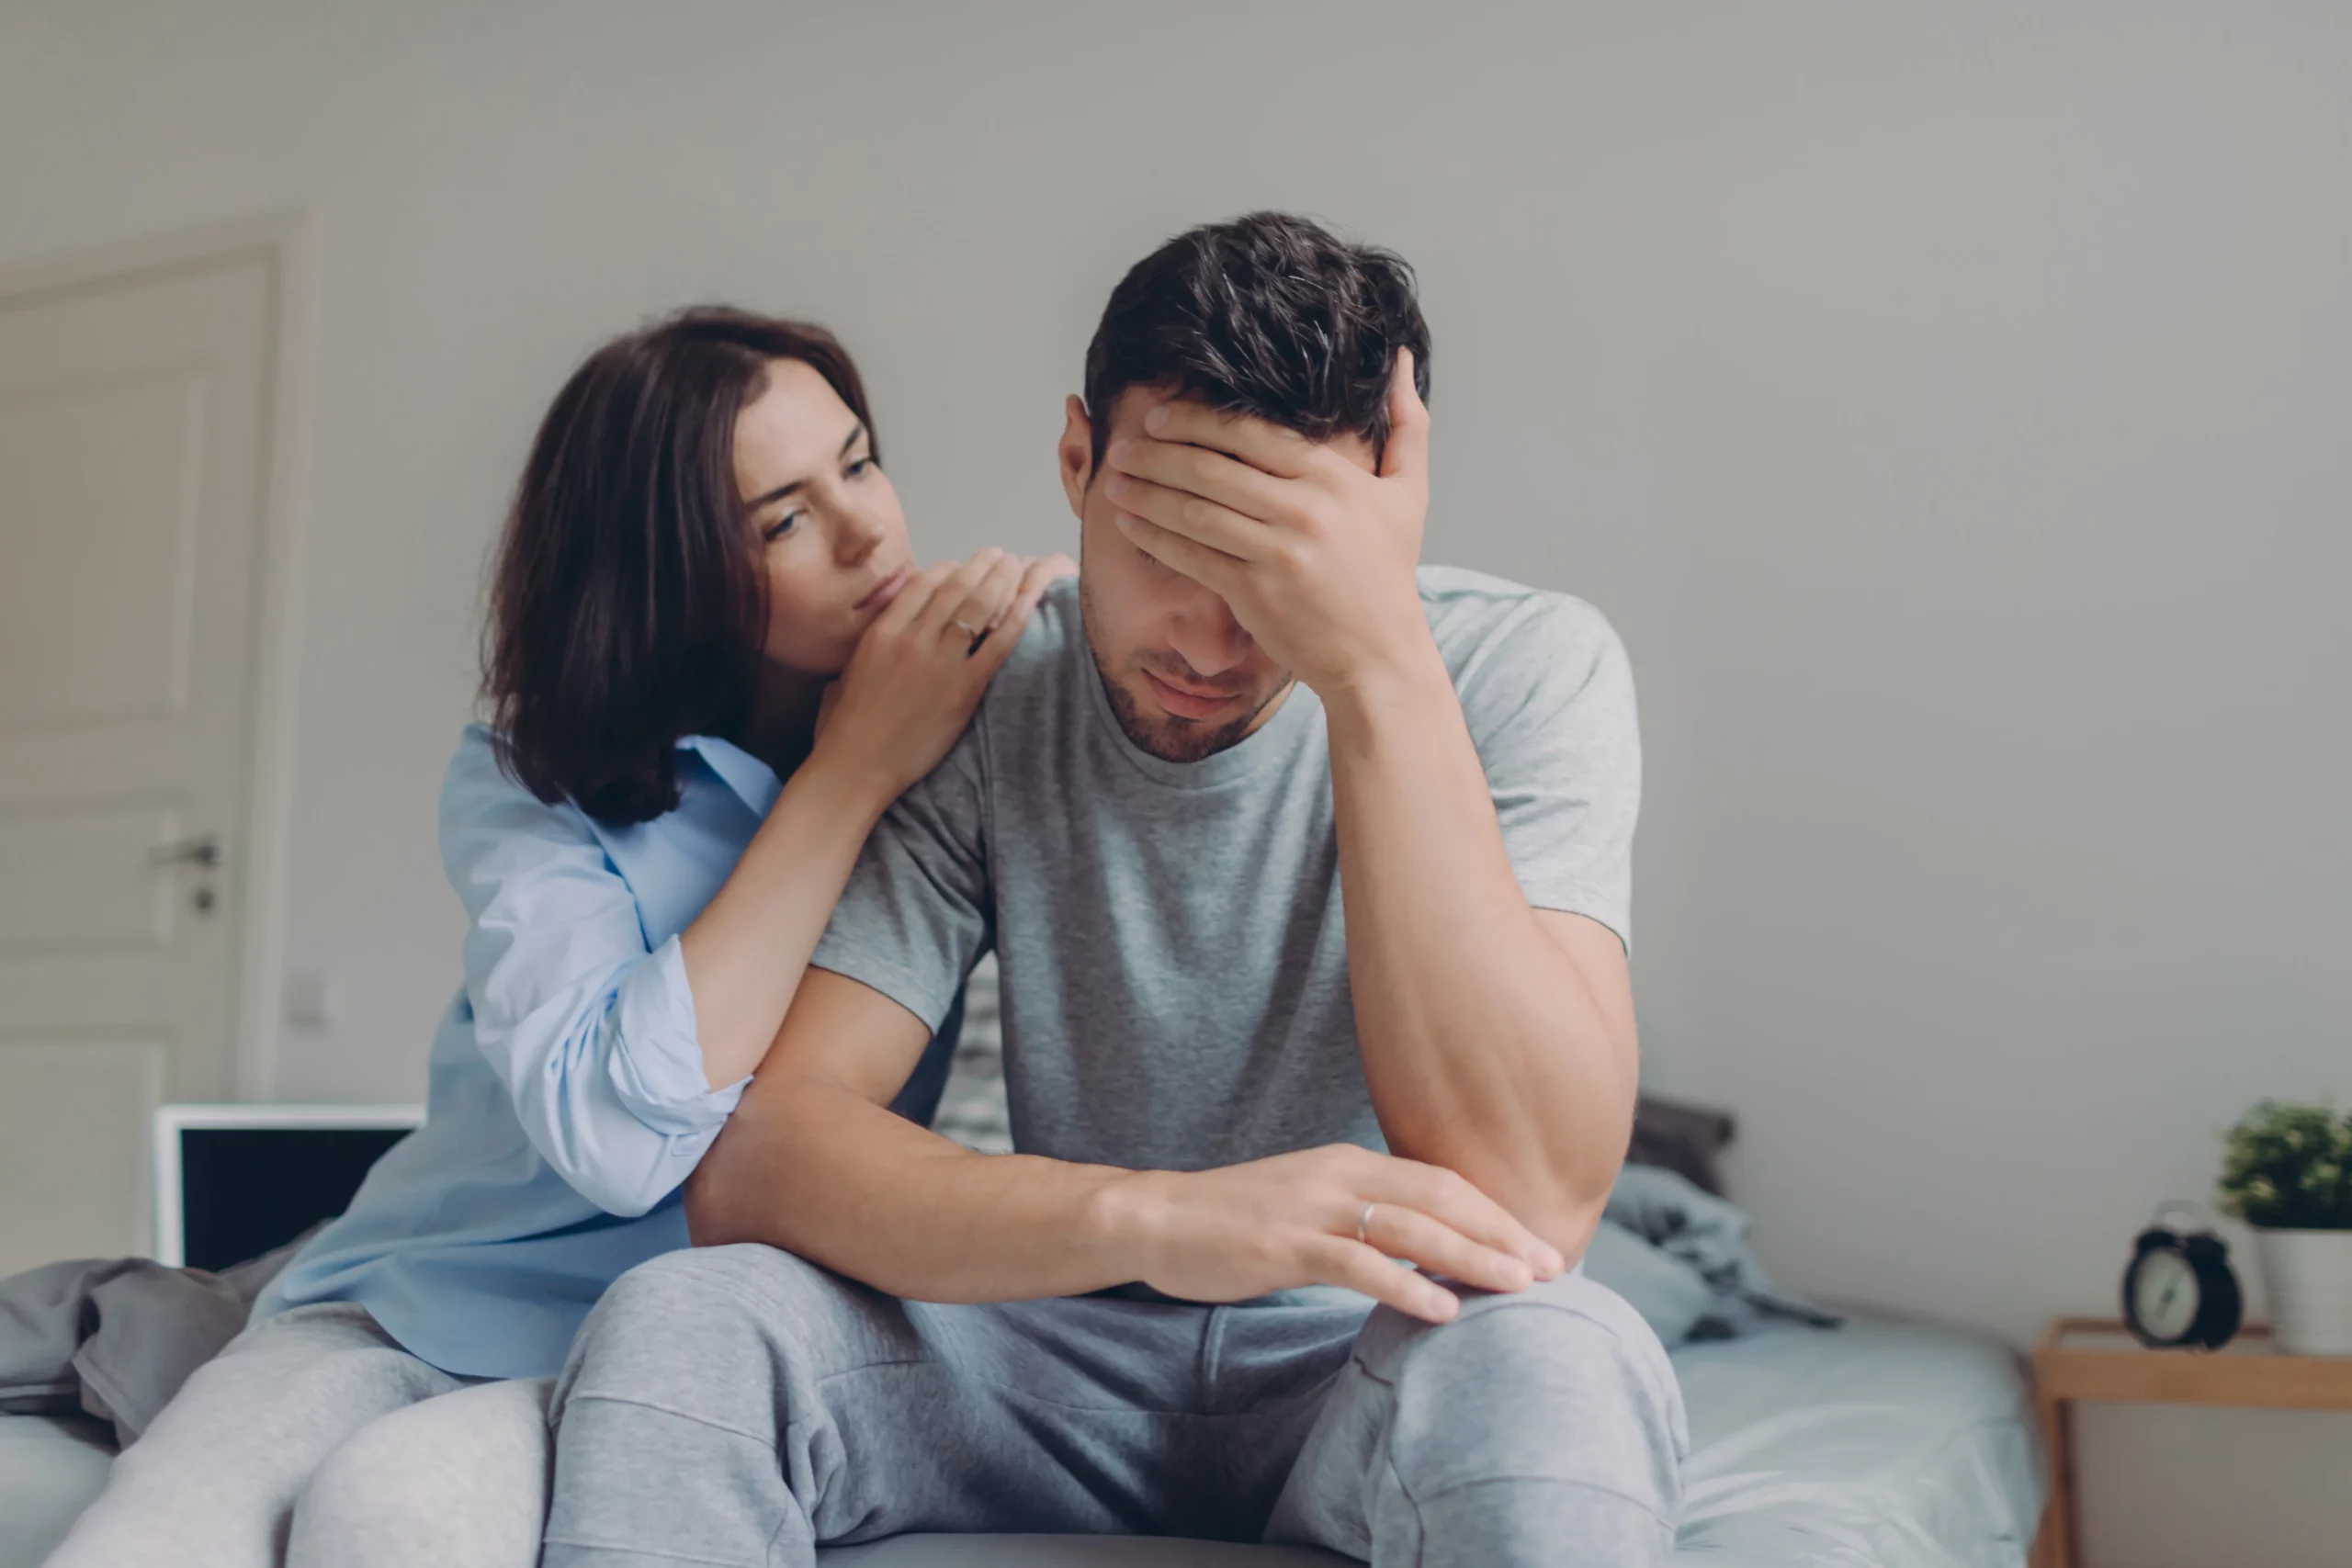 a woman consoling her boyfriend in a bedroom